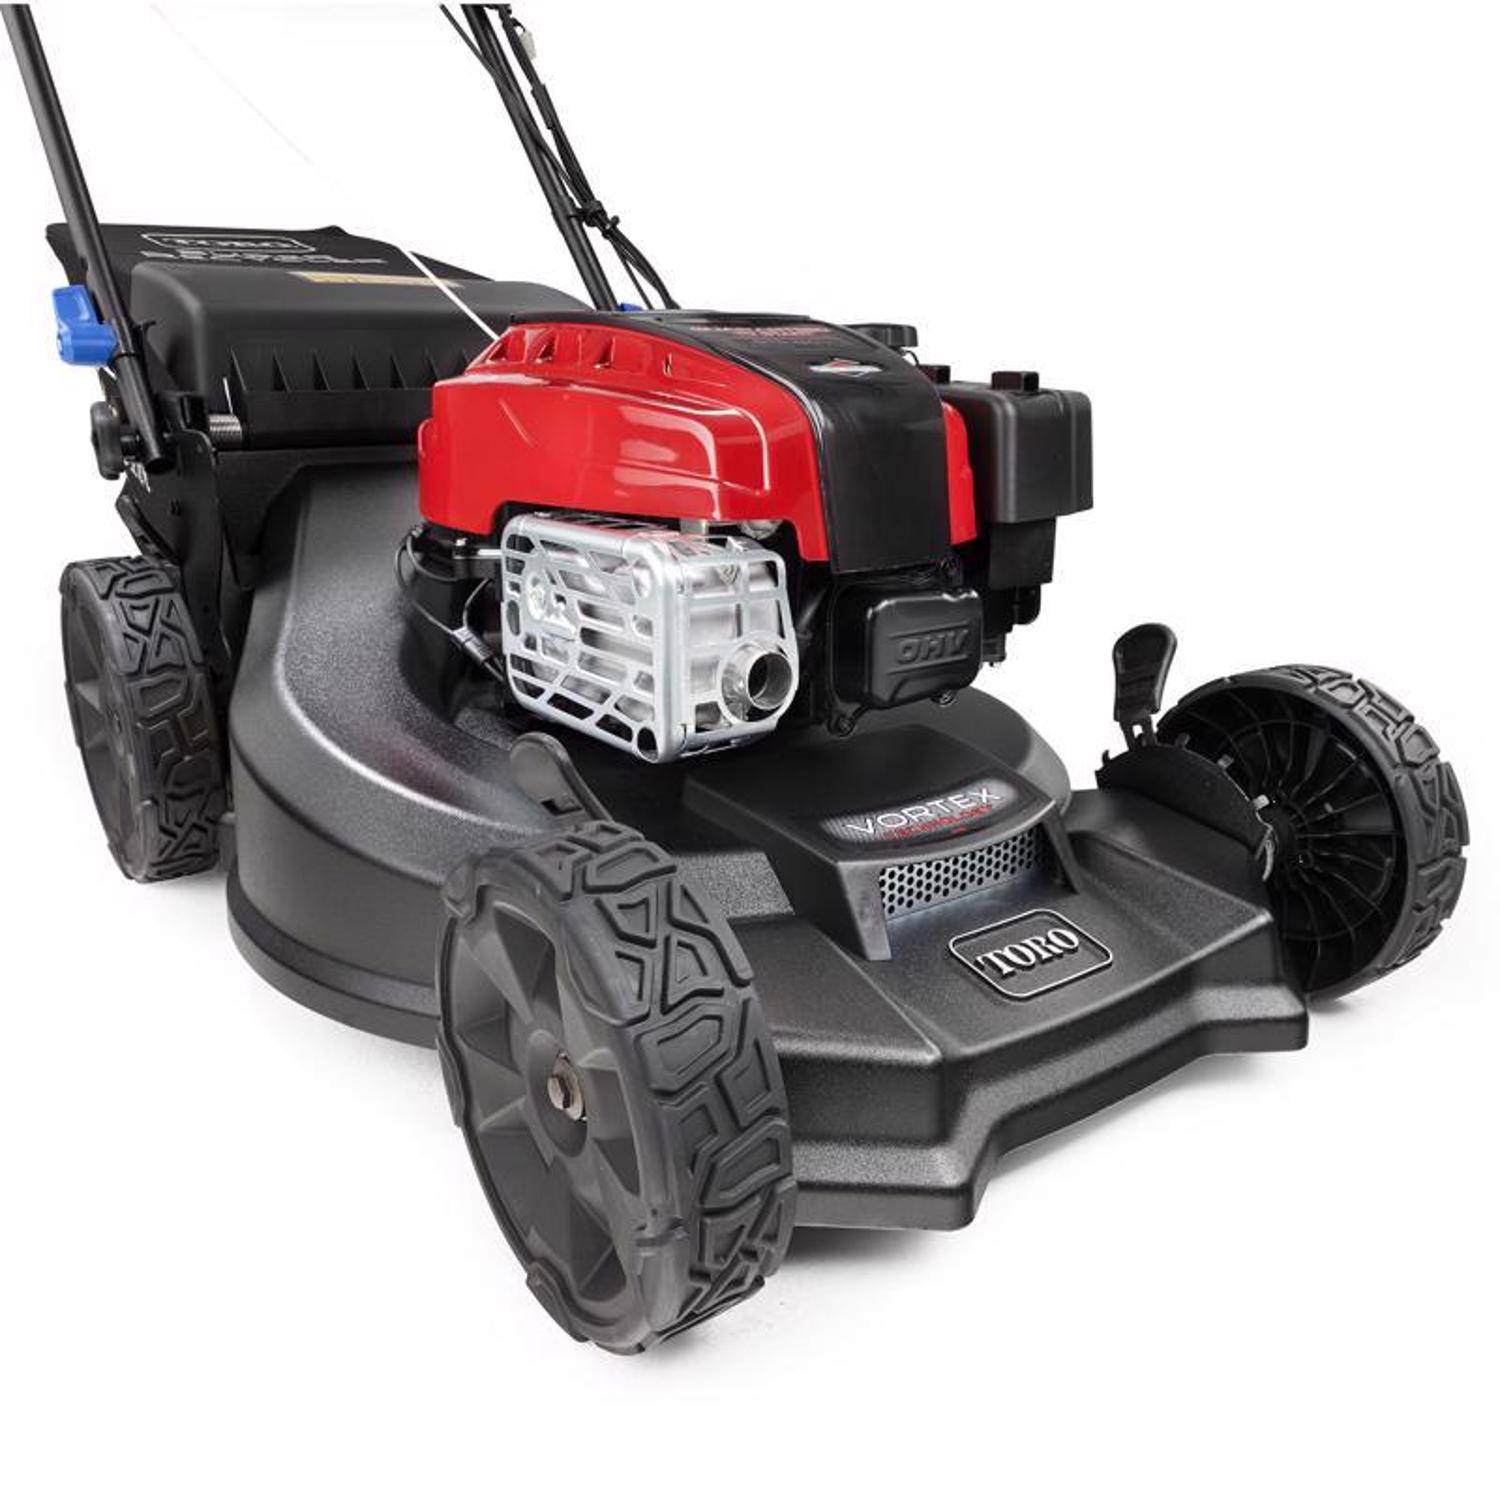 Toro Super Recycler 21 in. 190 cc Gas Self-Propelled Lawn Mower -  21564